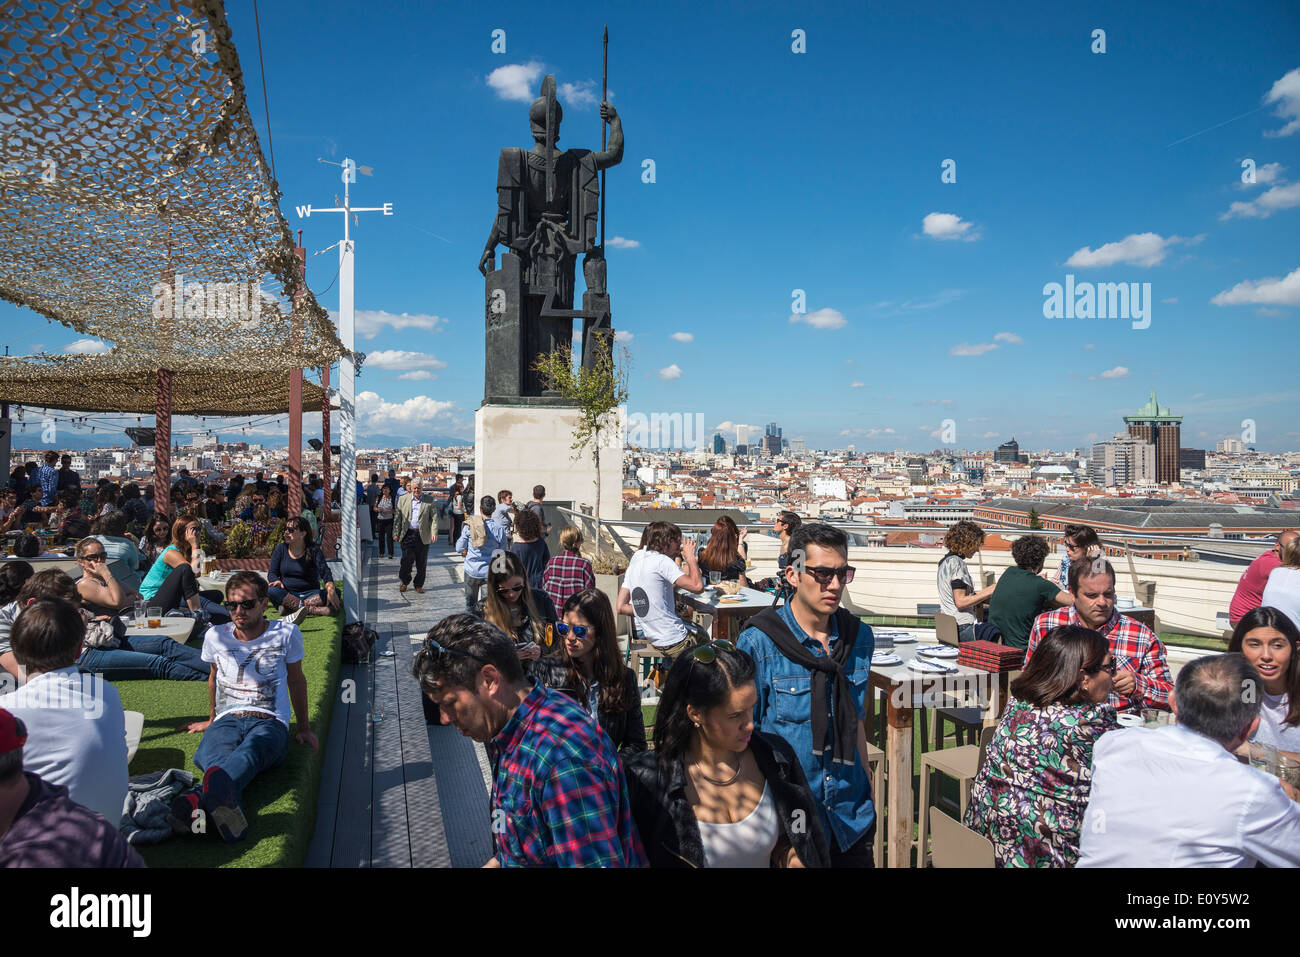 The rooftop cafe bar of the Circulo de Bellas Artes, with its statue of Minerva, Central Madrid, Spain Stock Photo